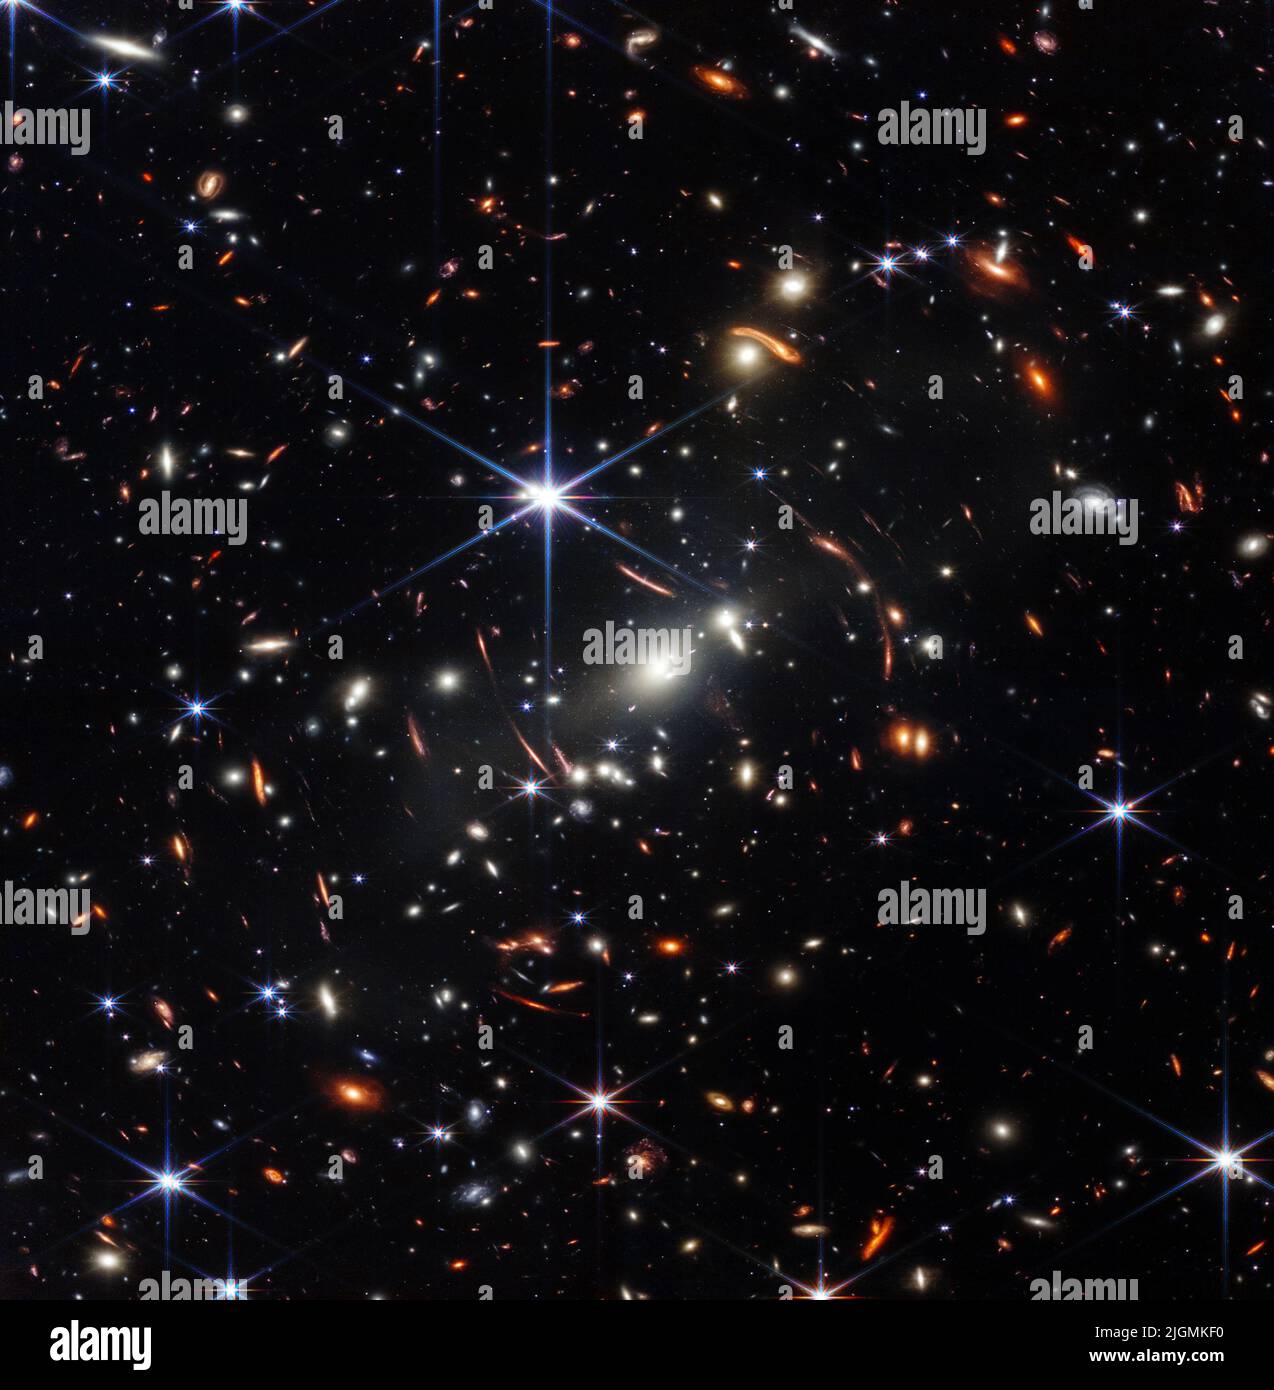 James Webb Telescope’s First Deep Field, Galaxy cluster SMACS 0723. NASA’s James Webb Space Telescope has produced the deepest & sharpest infrared image of the distant universe to date. Thousands of galaxies, including the faintest objects ever observed in the infrared, have appeared in Webb’s view for the first time. This slice of the vast universe covers a patch of sky approximately the size of a grain of sand held at arm’s length by someone on the ground.12 July 2022  Credit: NASA, ESA, CSA, and STScI / Alamy Live News Stock Photo